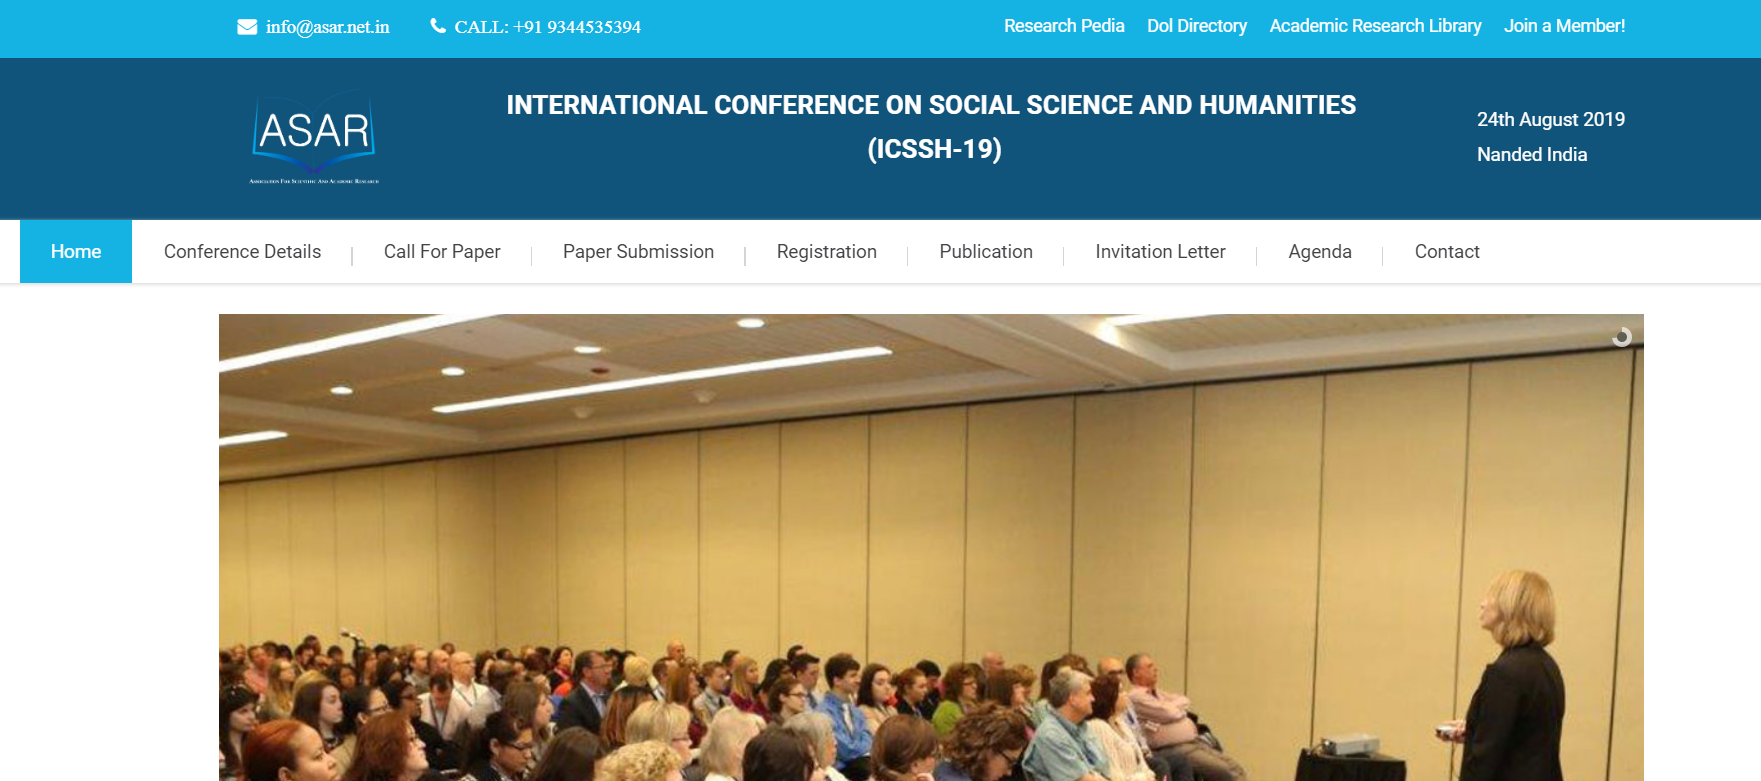 INTERNATIONAL CONFERENCE ON SOCIAL SCIENCE AND HUMANITIES  (ICSSH-19), Nanded, Maharashtra, India